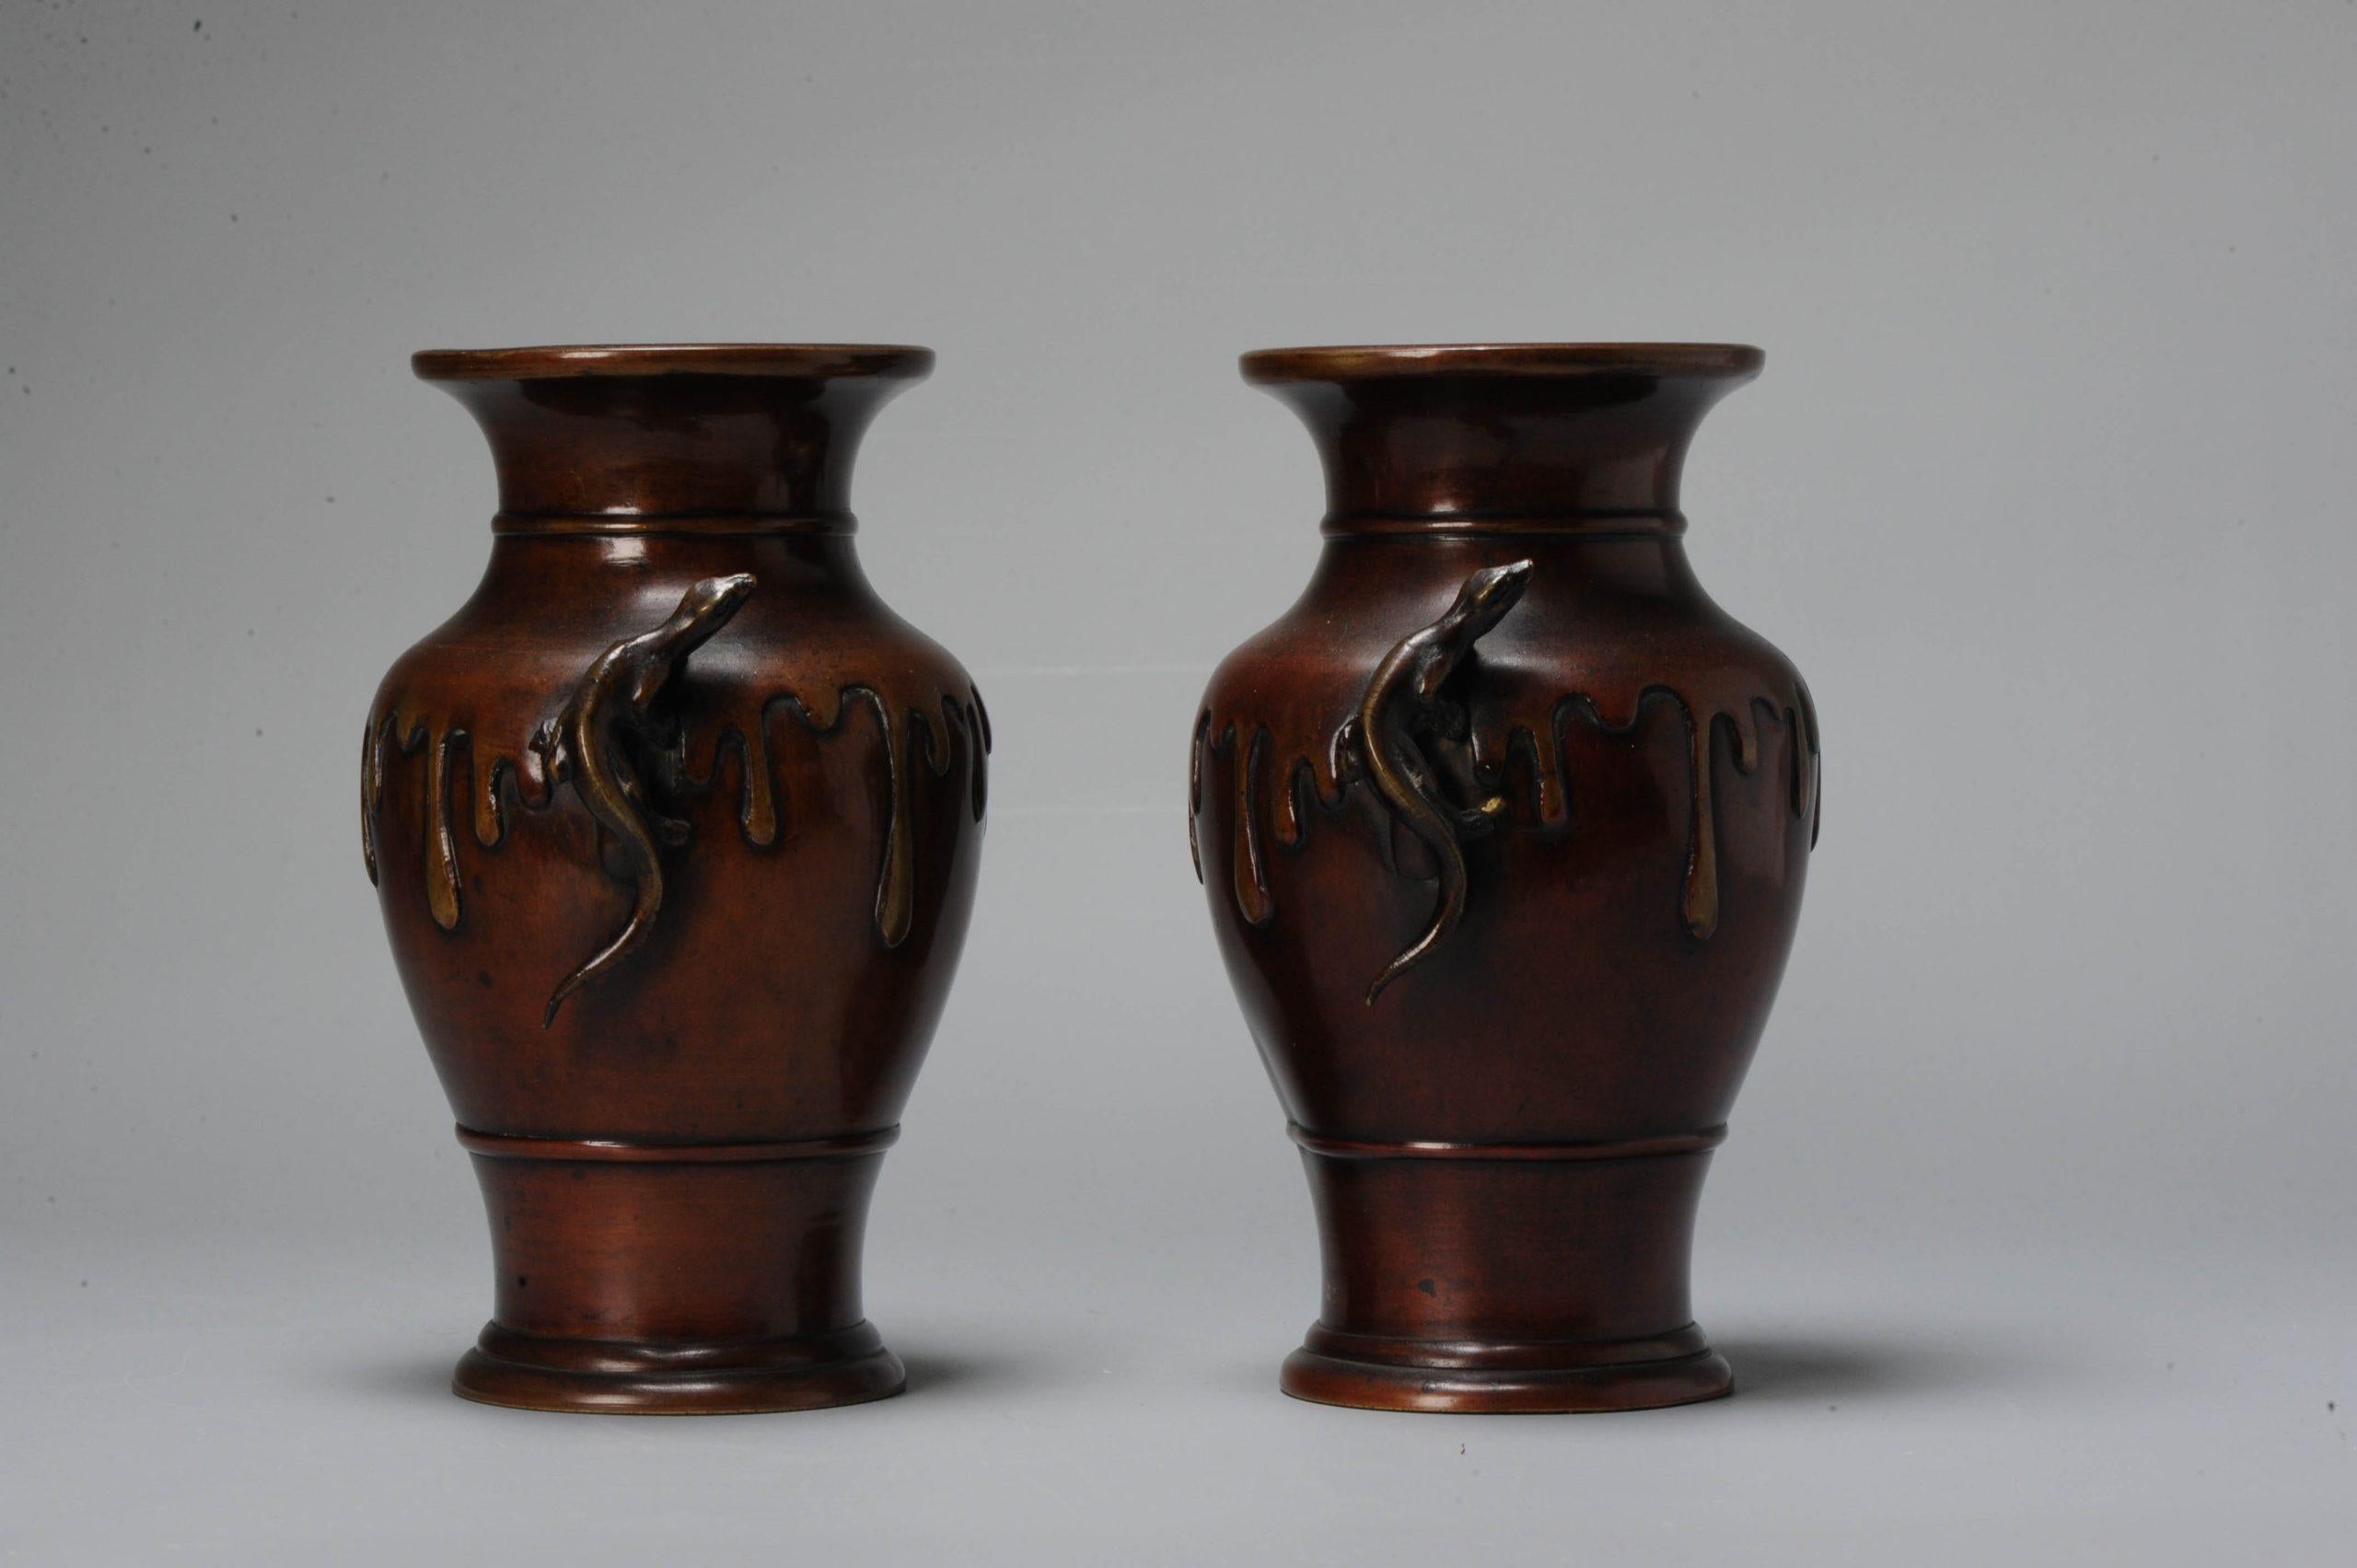 Very artistic Japanese bronze vases with drip design reminiscent of an overflowing jar. Beautiful patina. Handles are salamanders climbing the vases.

These pieces are difficult to photograph, pictures in natural light added.

Marked at